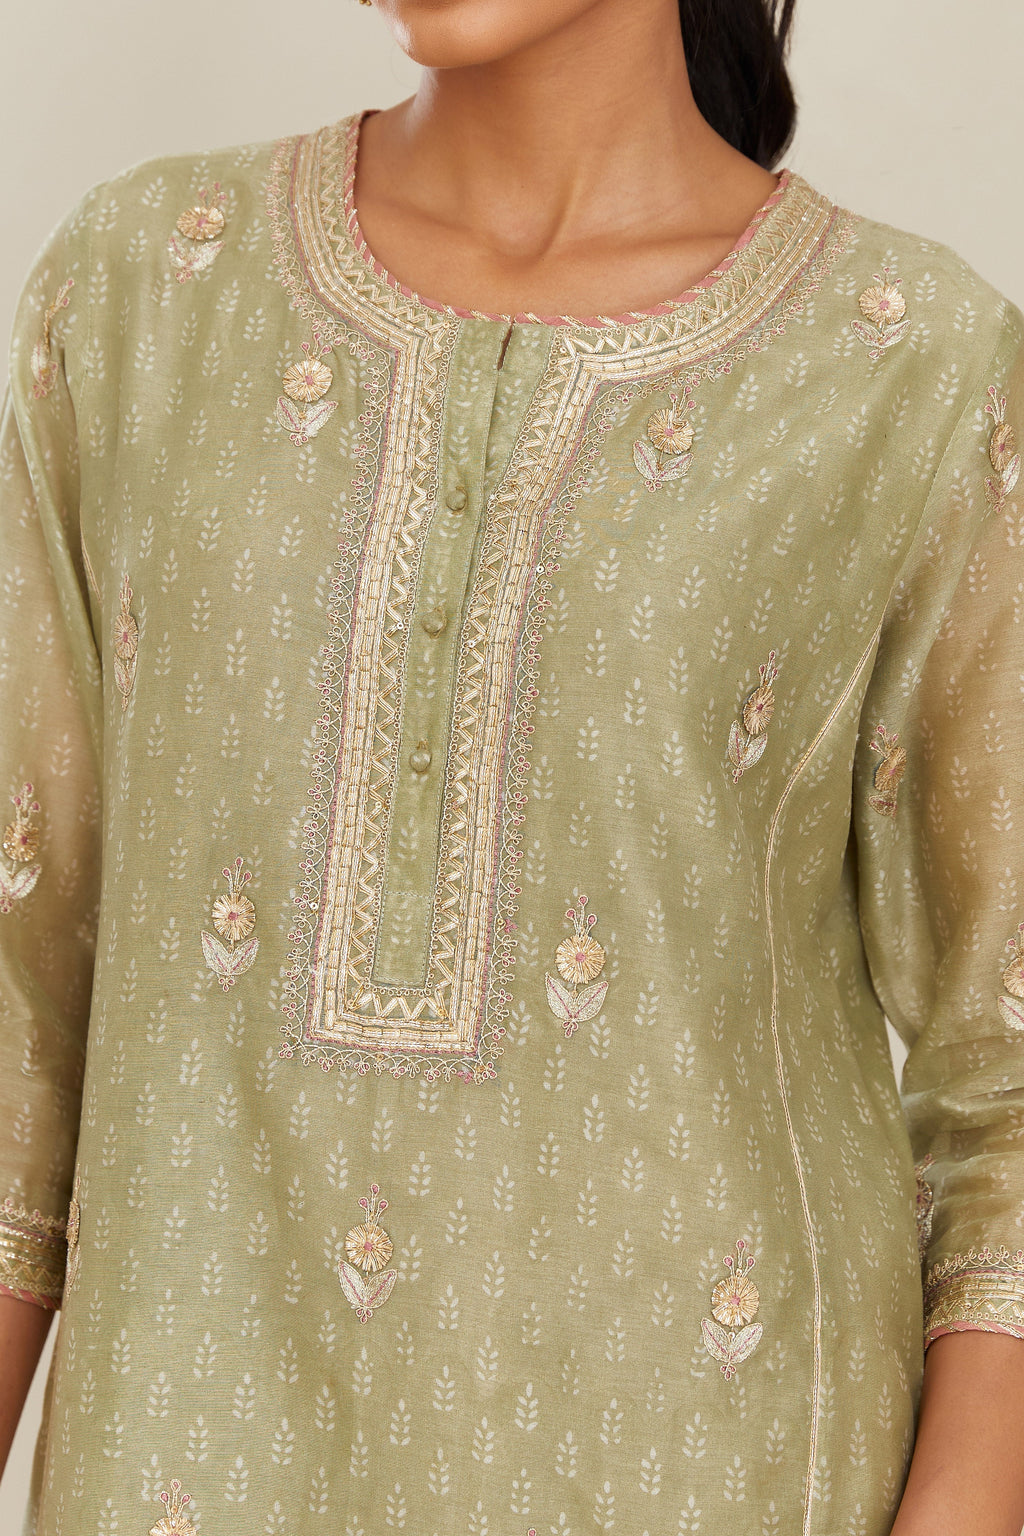 Sage green hand block printed silk chanderi kurta set with side panels, highlighted with gold gota and zari embroidery.